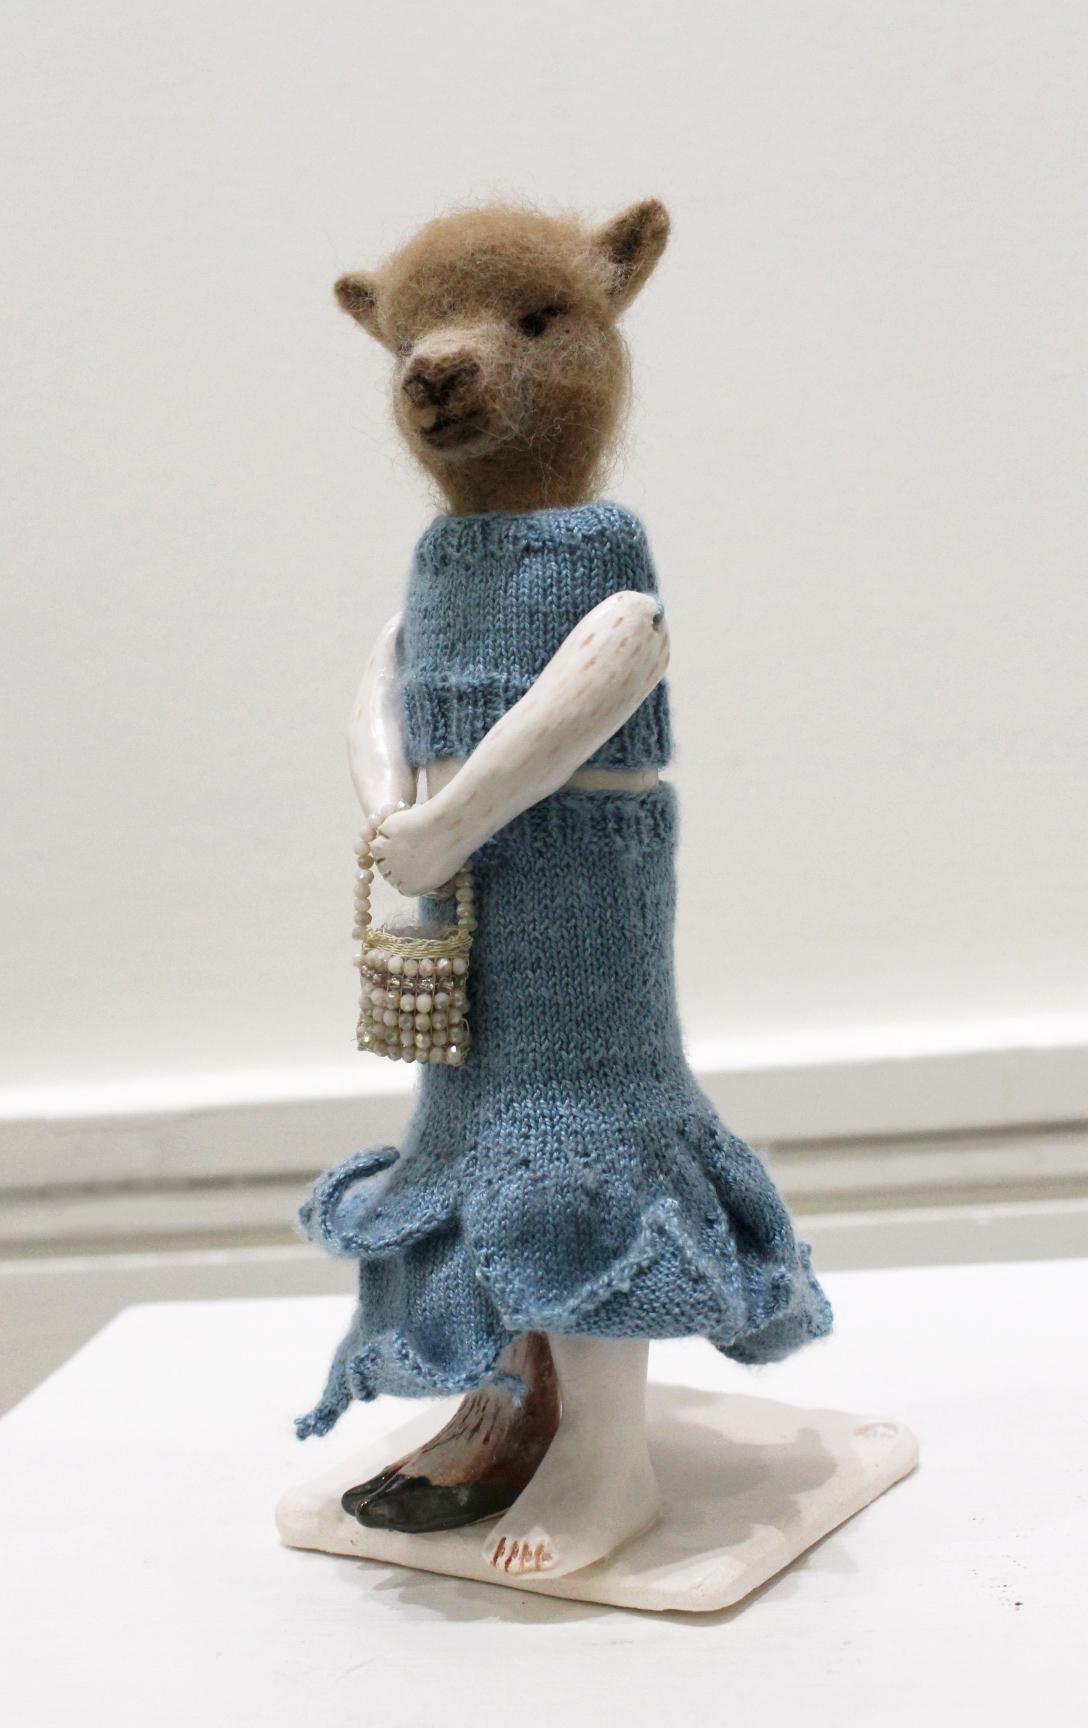 Eva Maier Figurative Sculpture - "All Dressed Up" mixed media, needle felted wool, llama, small, sculpture